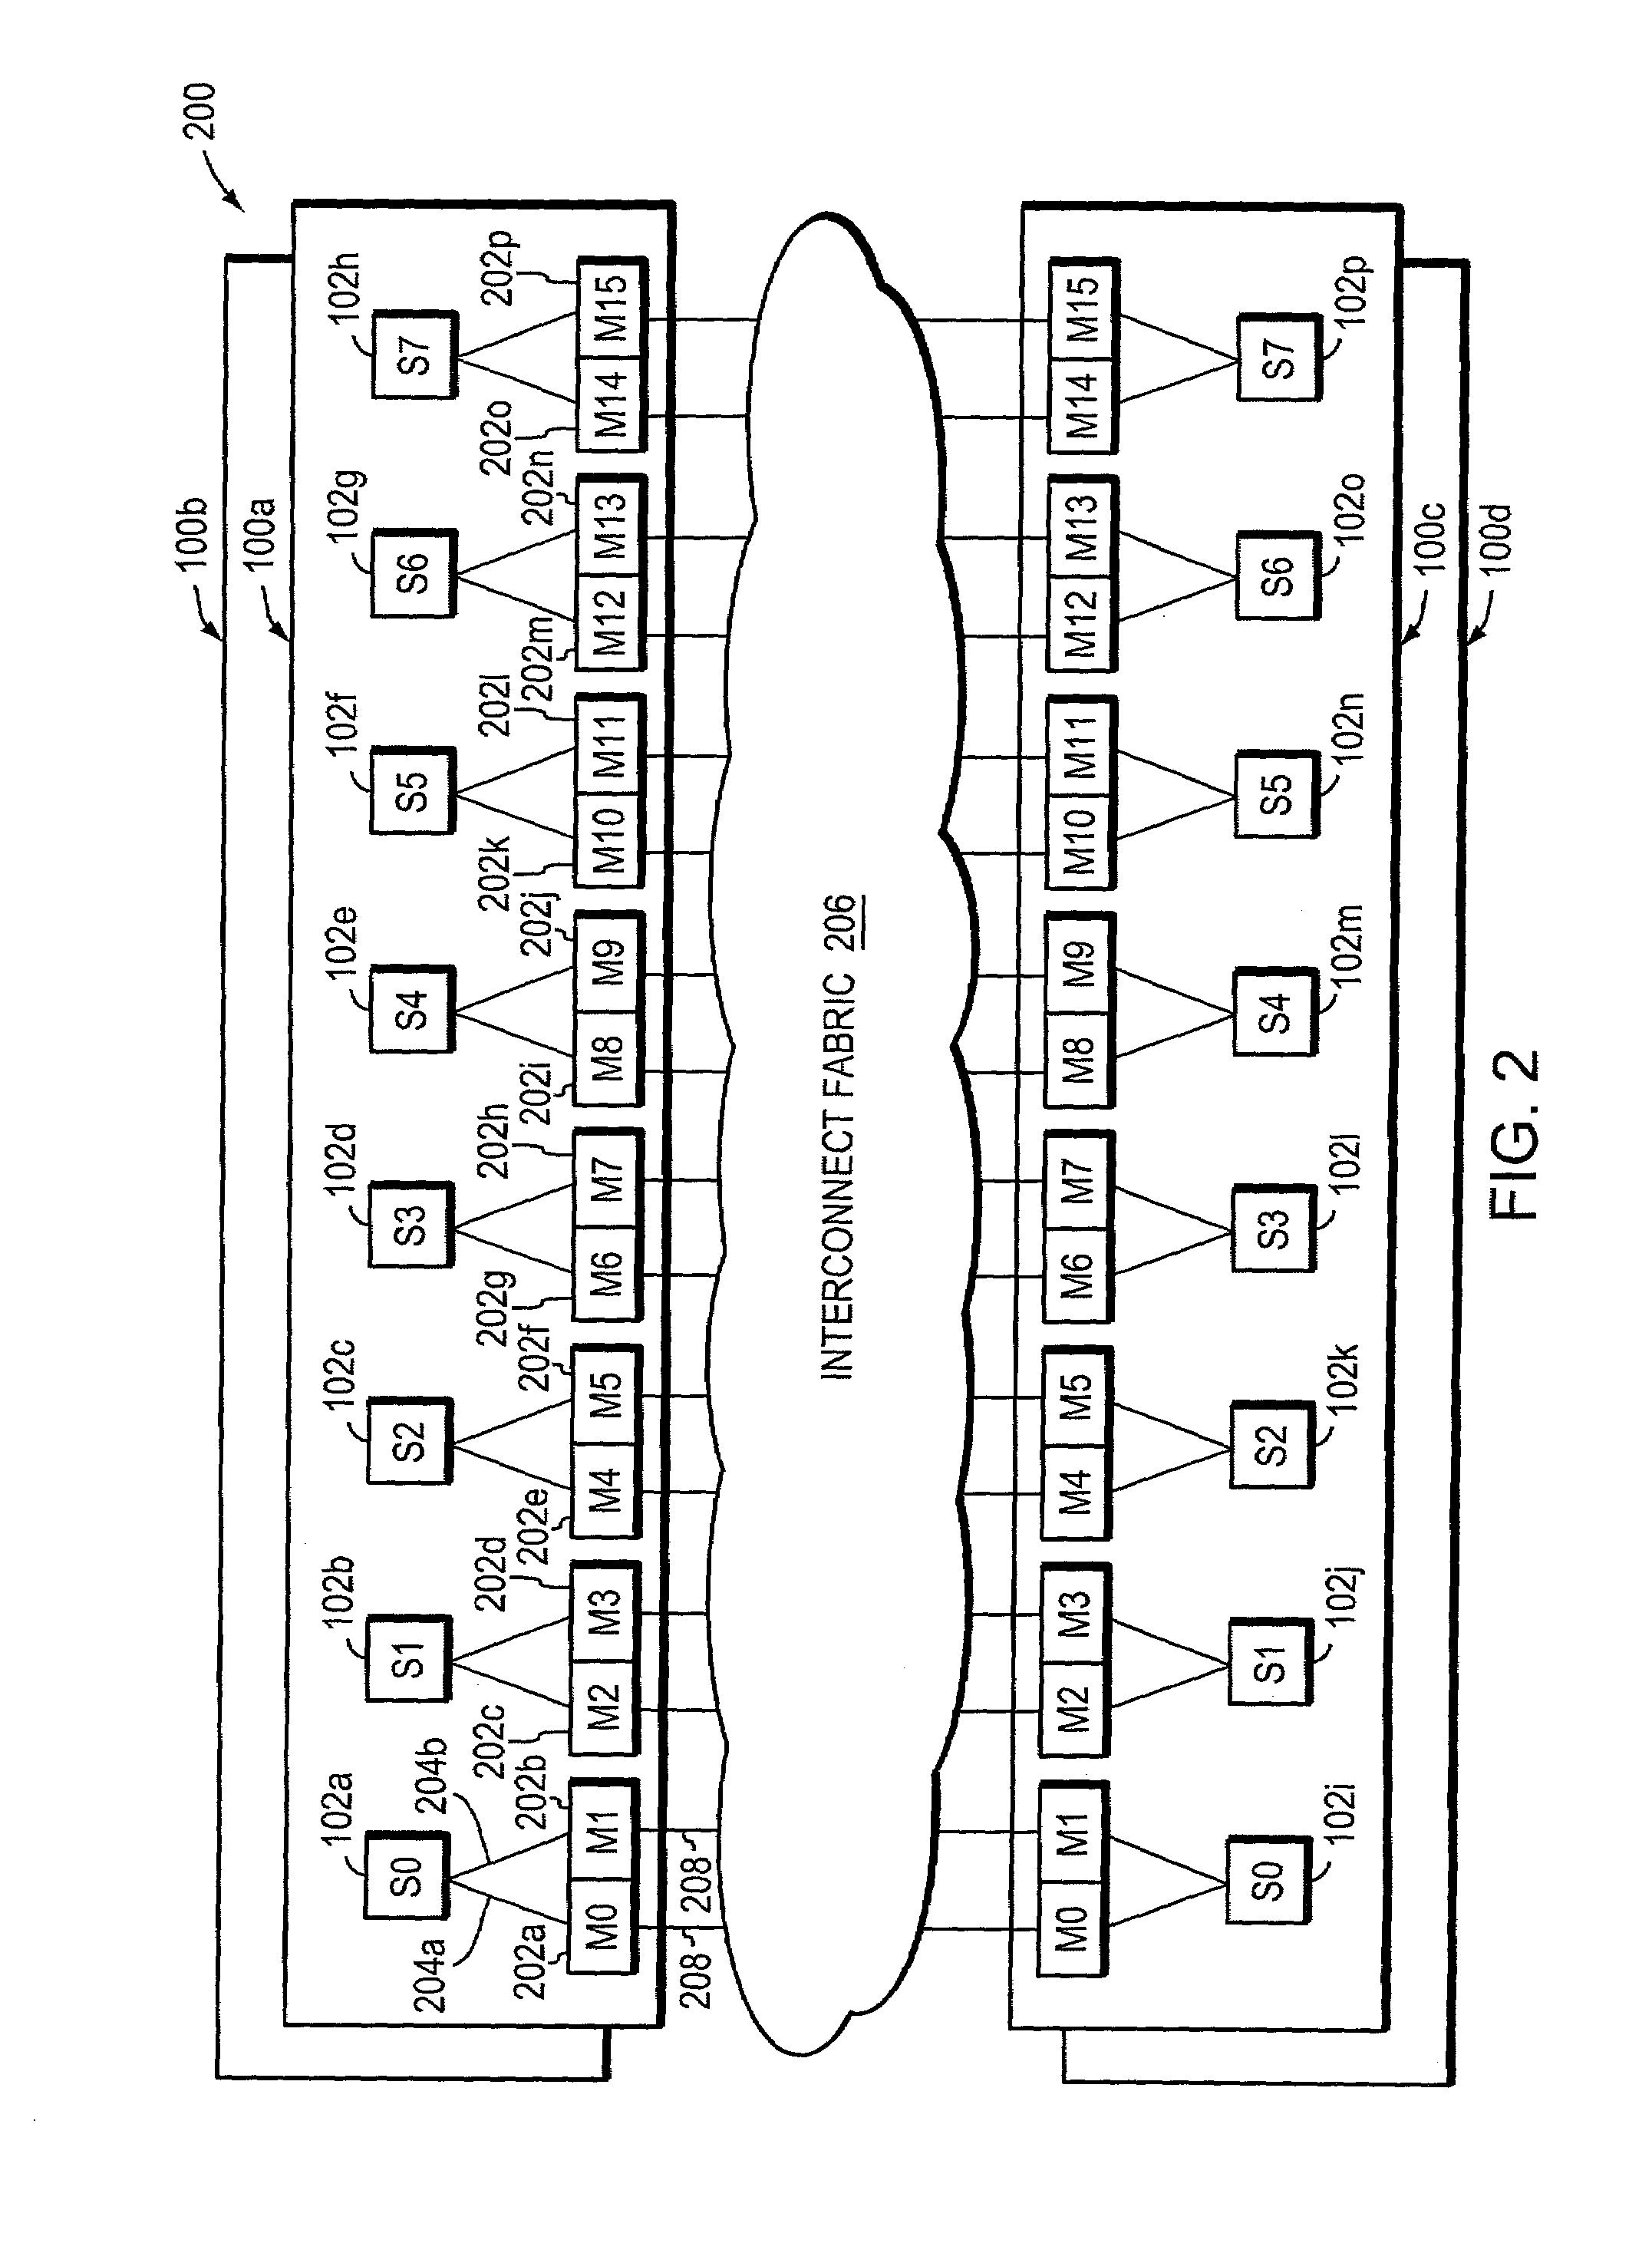 System and method enabling efficient cache line reuse in a computer system